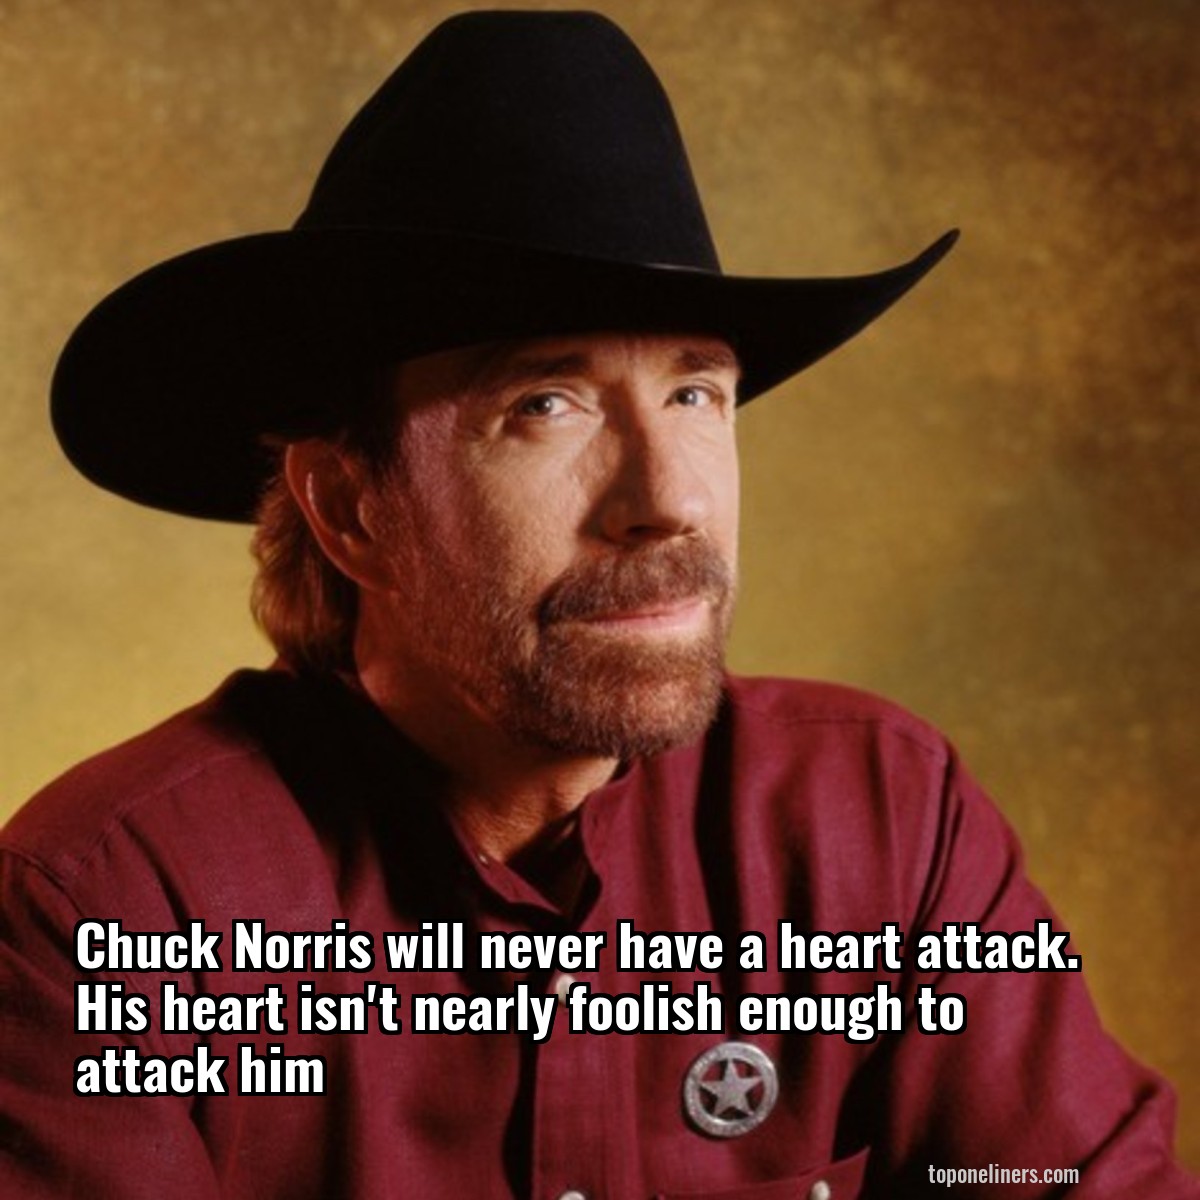 Chuck Norris will never have a heart attack. His heart isn't nearly foolish enough to attack him